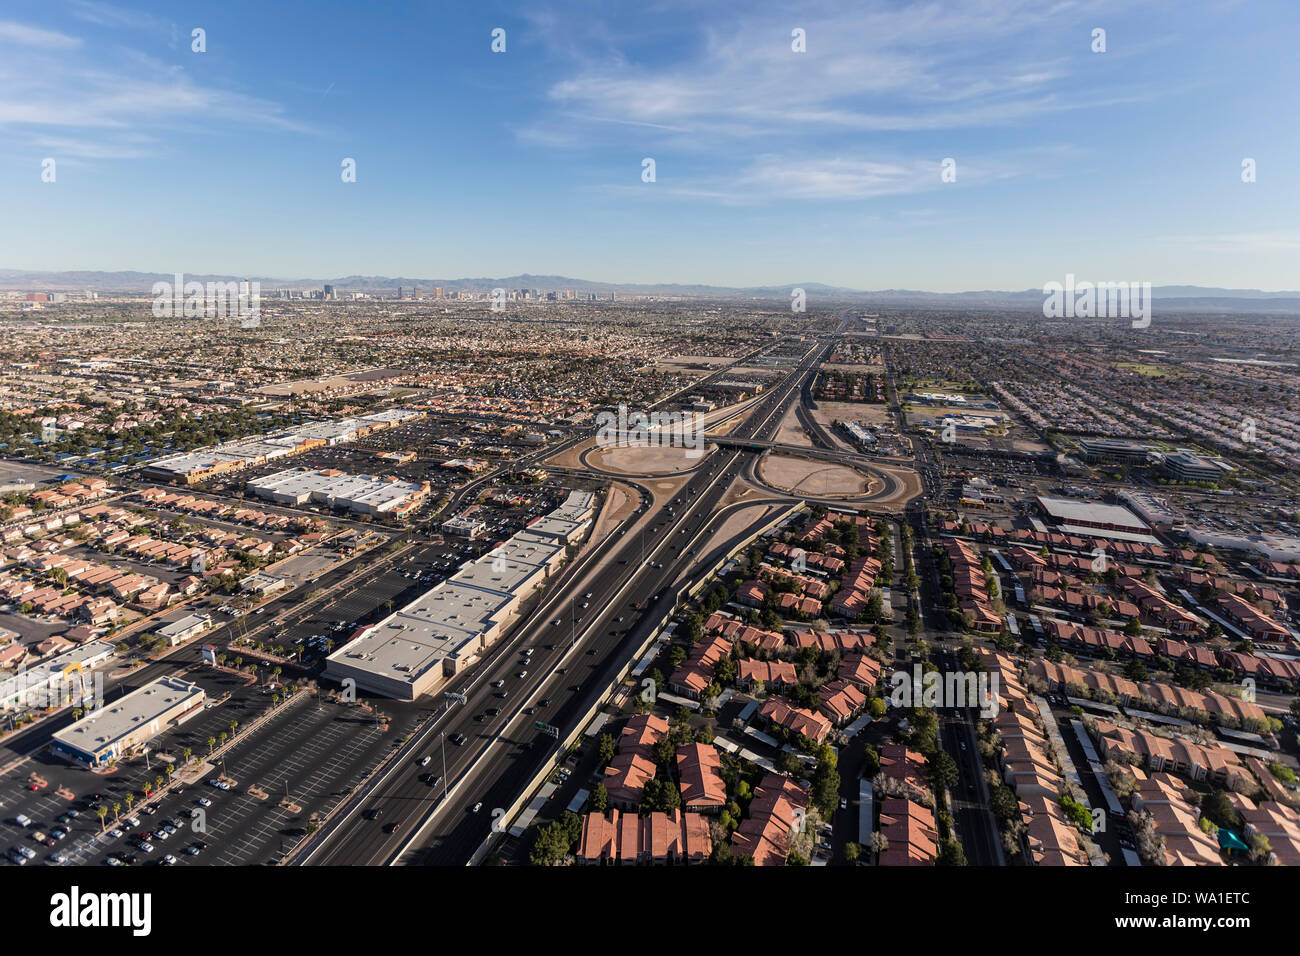 Aerial view of the route 95 freeway and suburban Summerlin homes in  sprawling Las Vegas, Nevada Stock Photo - Alamy